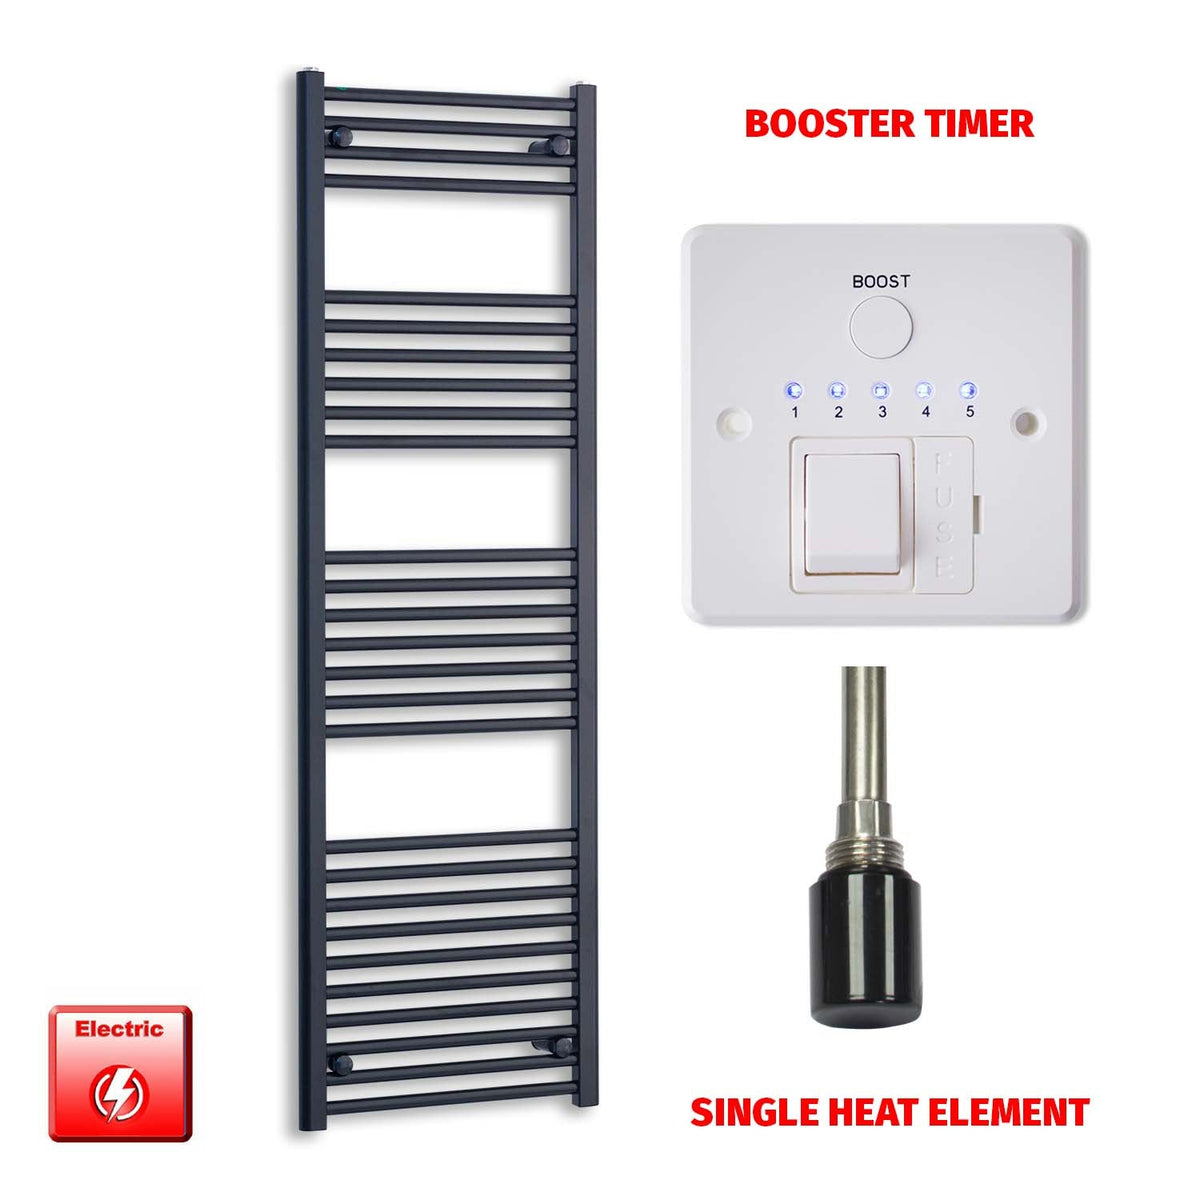 1600 x 500 Flat Black Pre-Filled Electric Heated Towel Radiator HTR Single Booster Timer